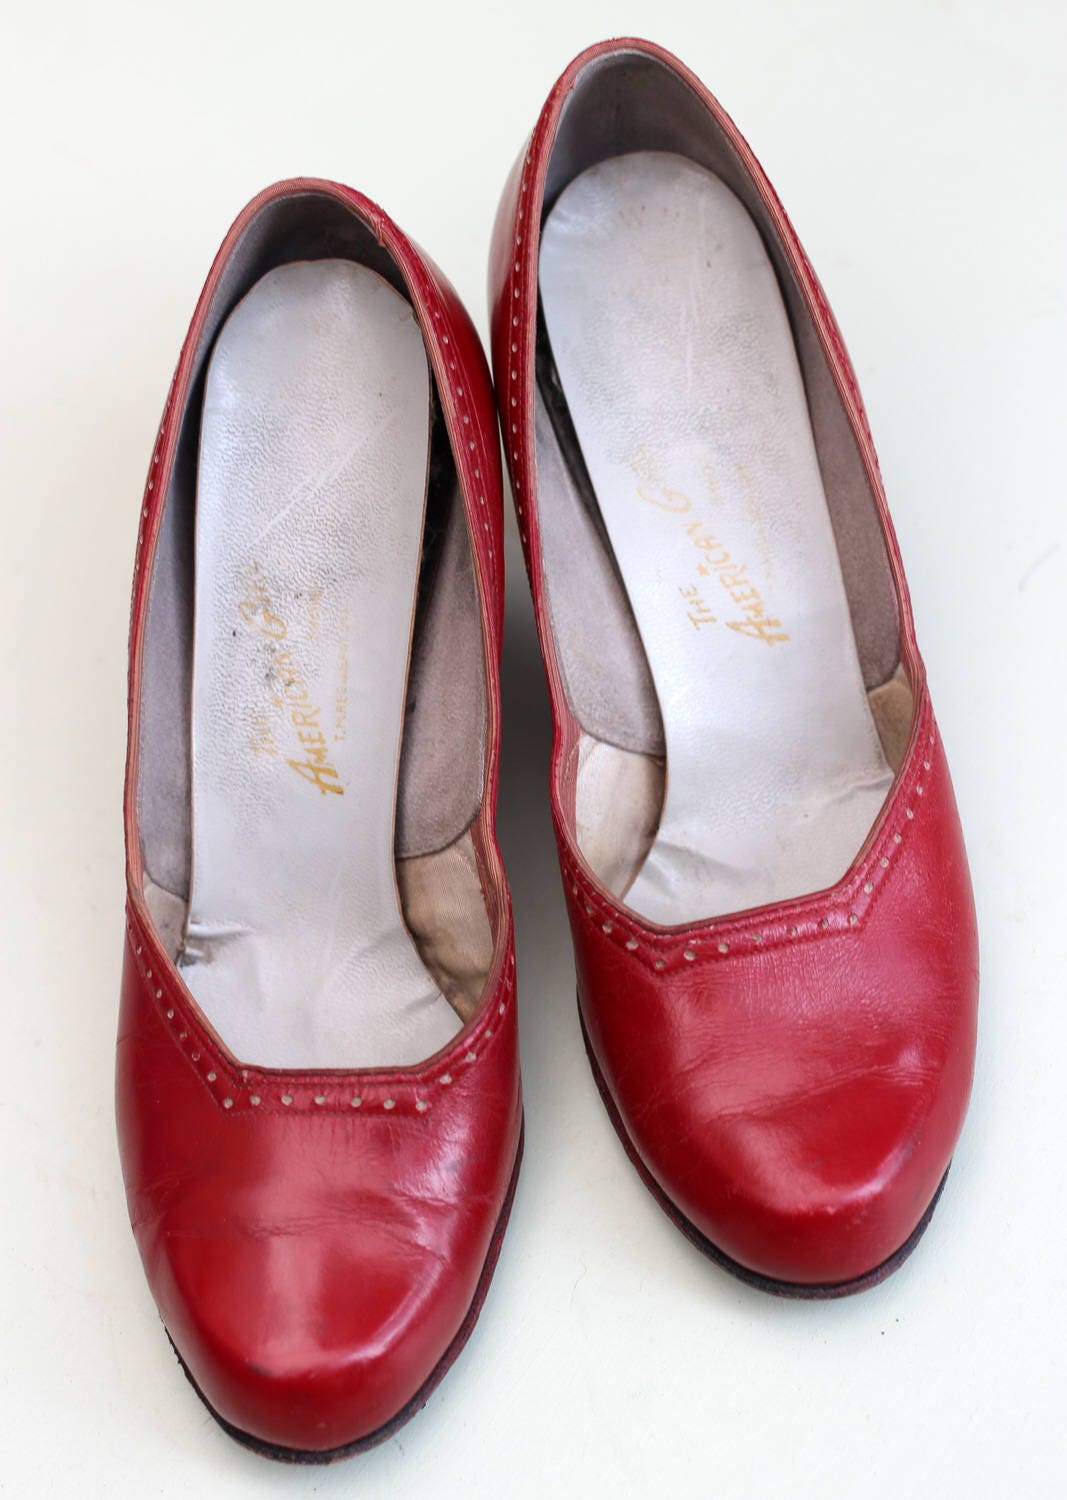 Vintage 1940s Early 1950s Tomato Red Leather Pumps Court Shoes UK 4 US ...